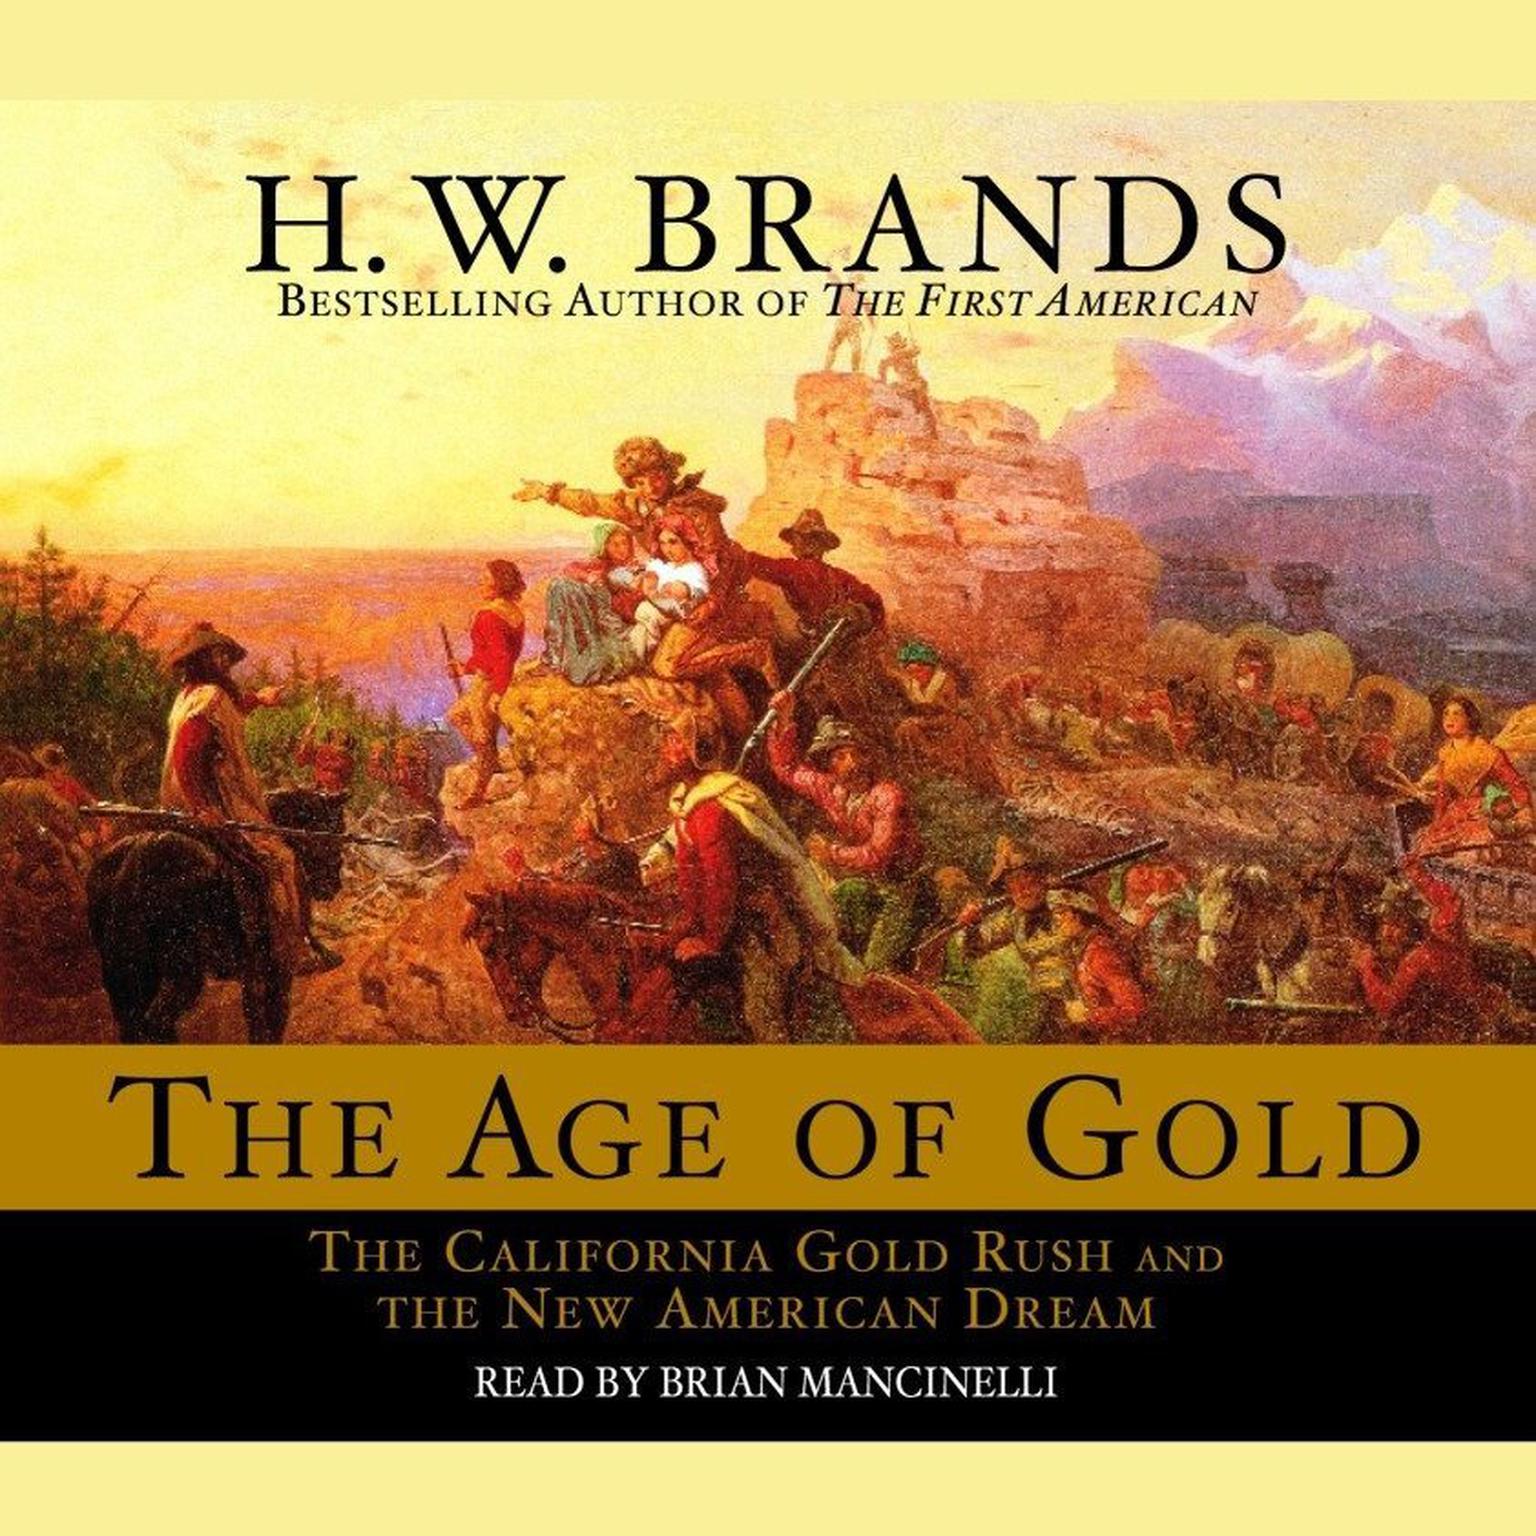 The Age of Gold (Abridged): The California Gold Rush and the New American Dream Audiobook, by H. W. Brands